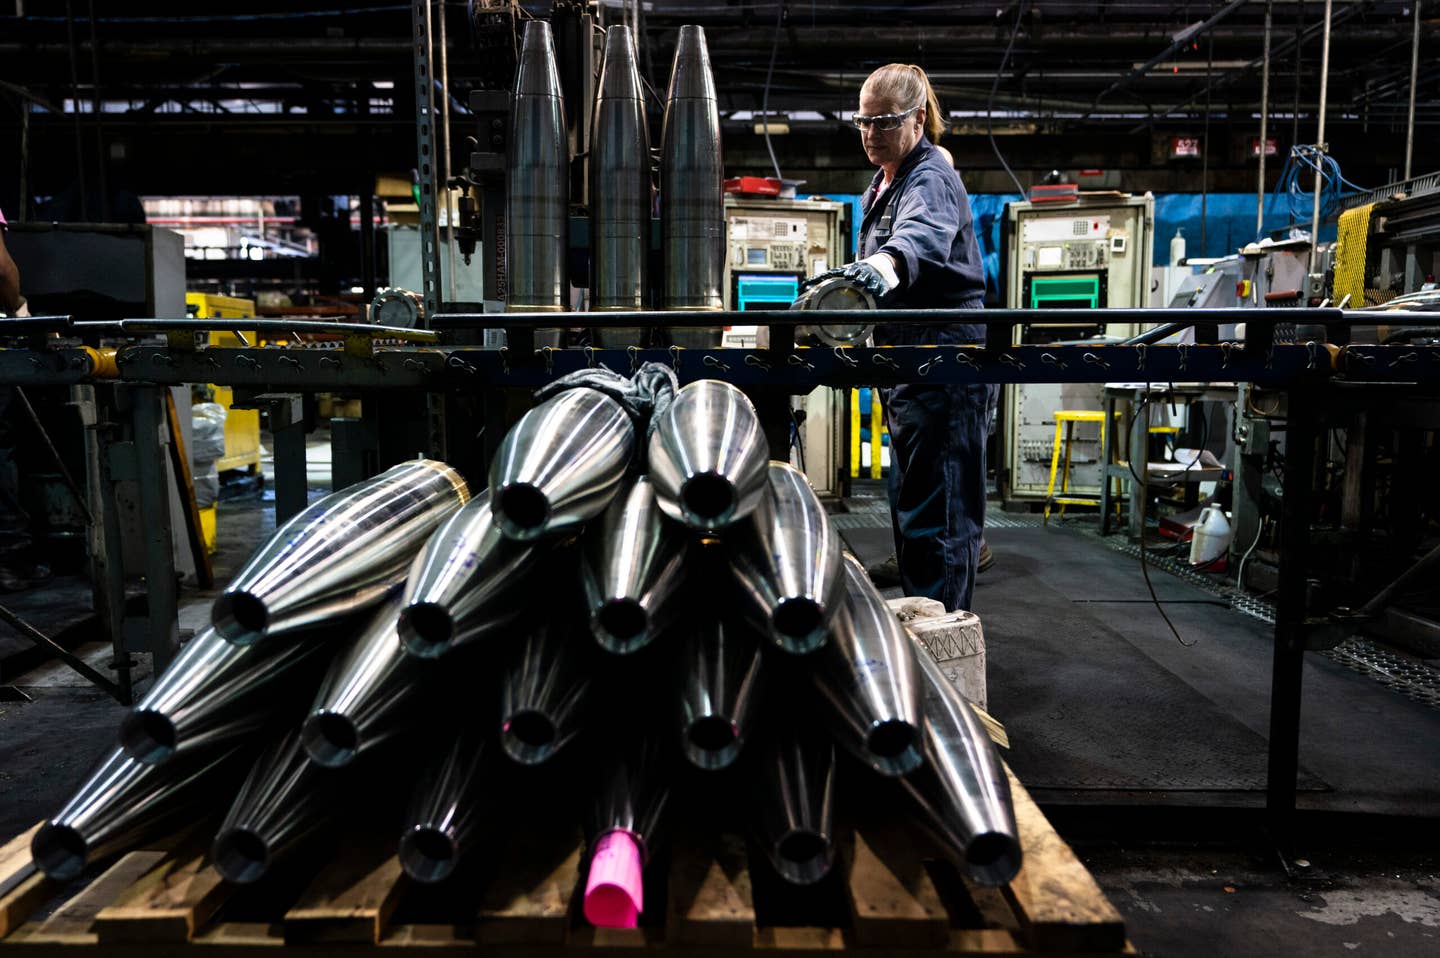 A steel worker moves a 155 mm M795 artillery projectile during the manufacturing process at the Scranton Army Ammunition Plant in Scranton, Pa. (AP Photo/Matt Rourke)